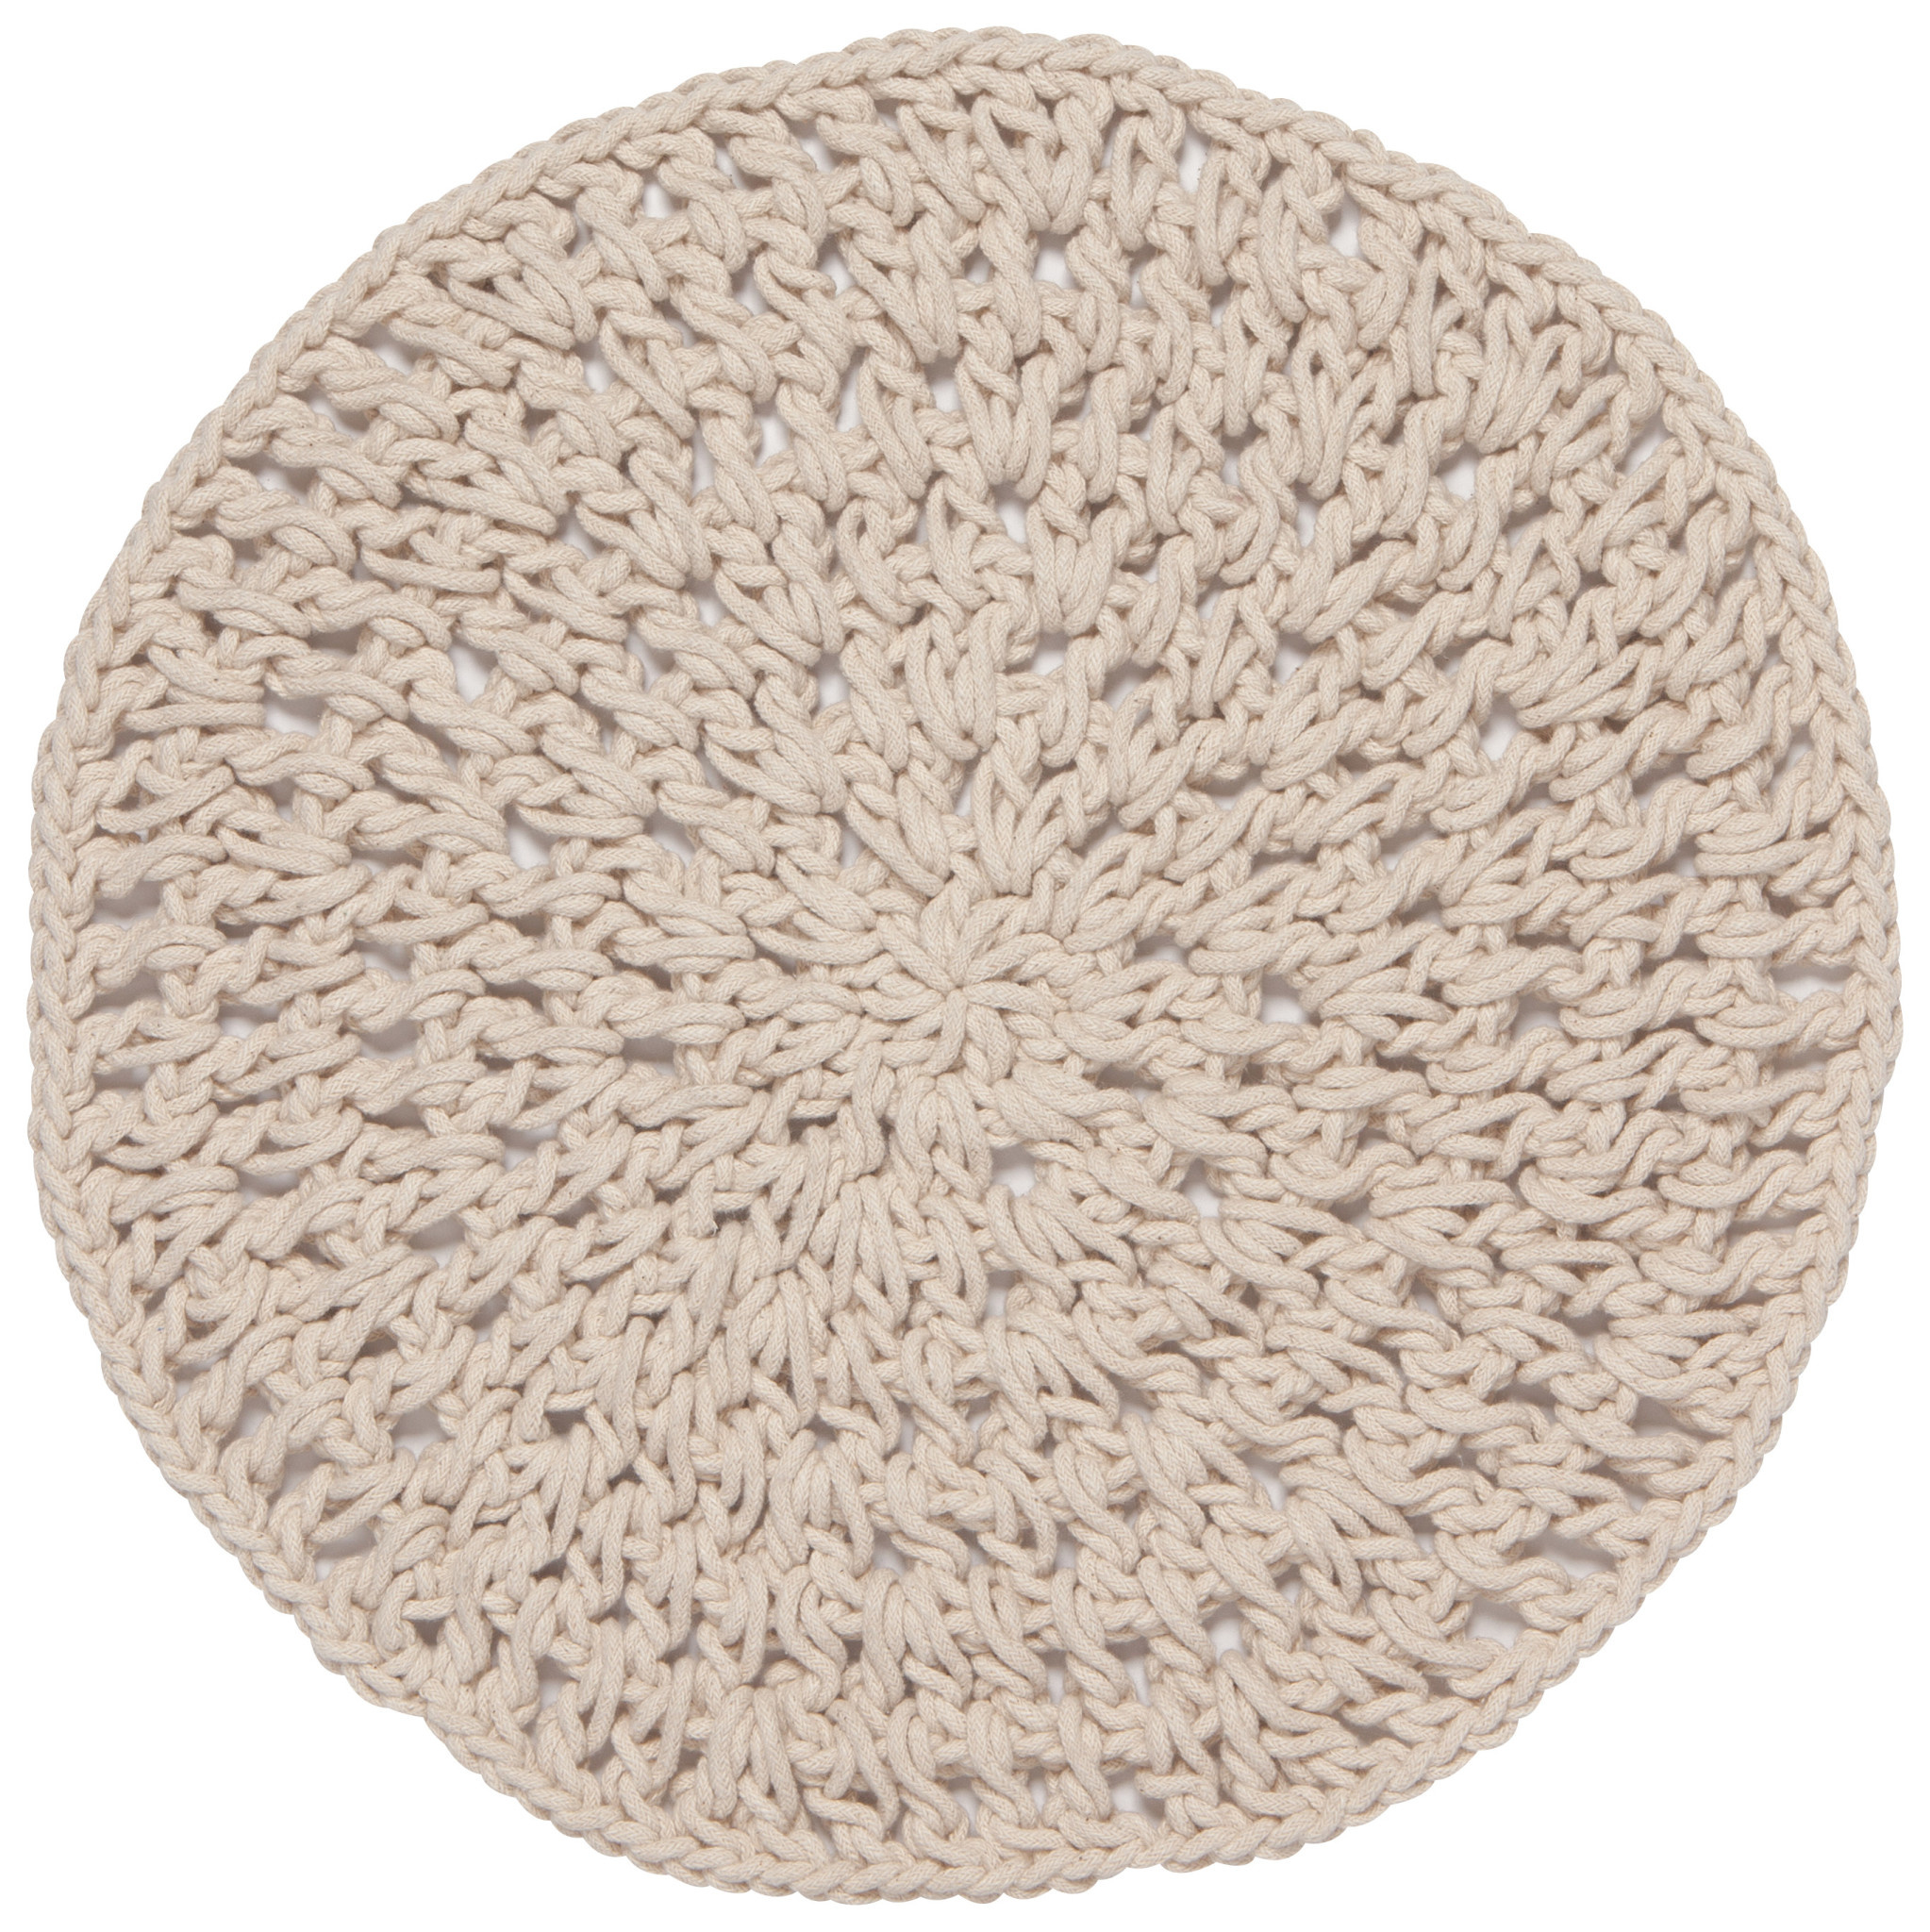 Danica Danica - Placemat Knotted Natural Round D15